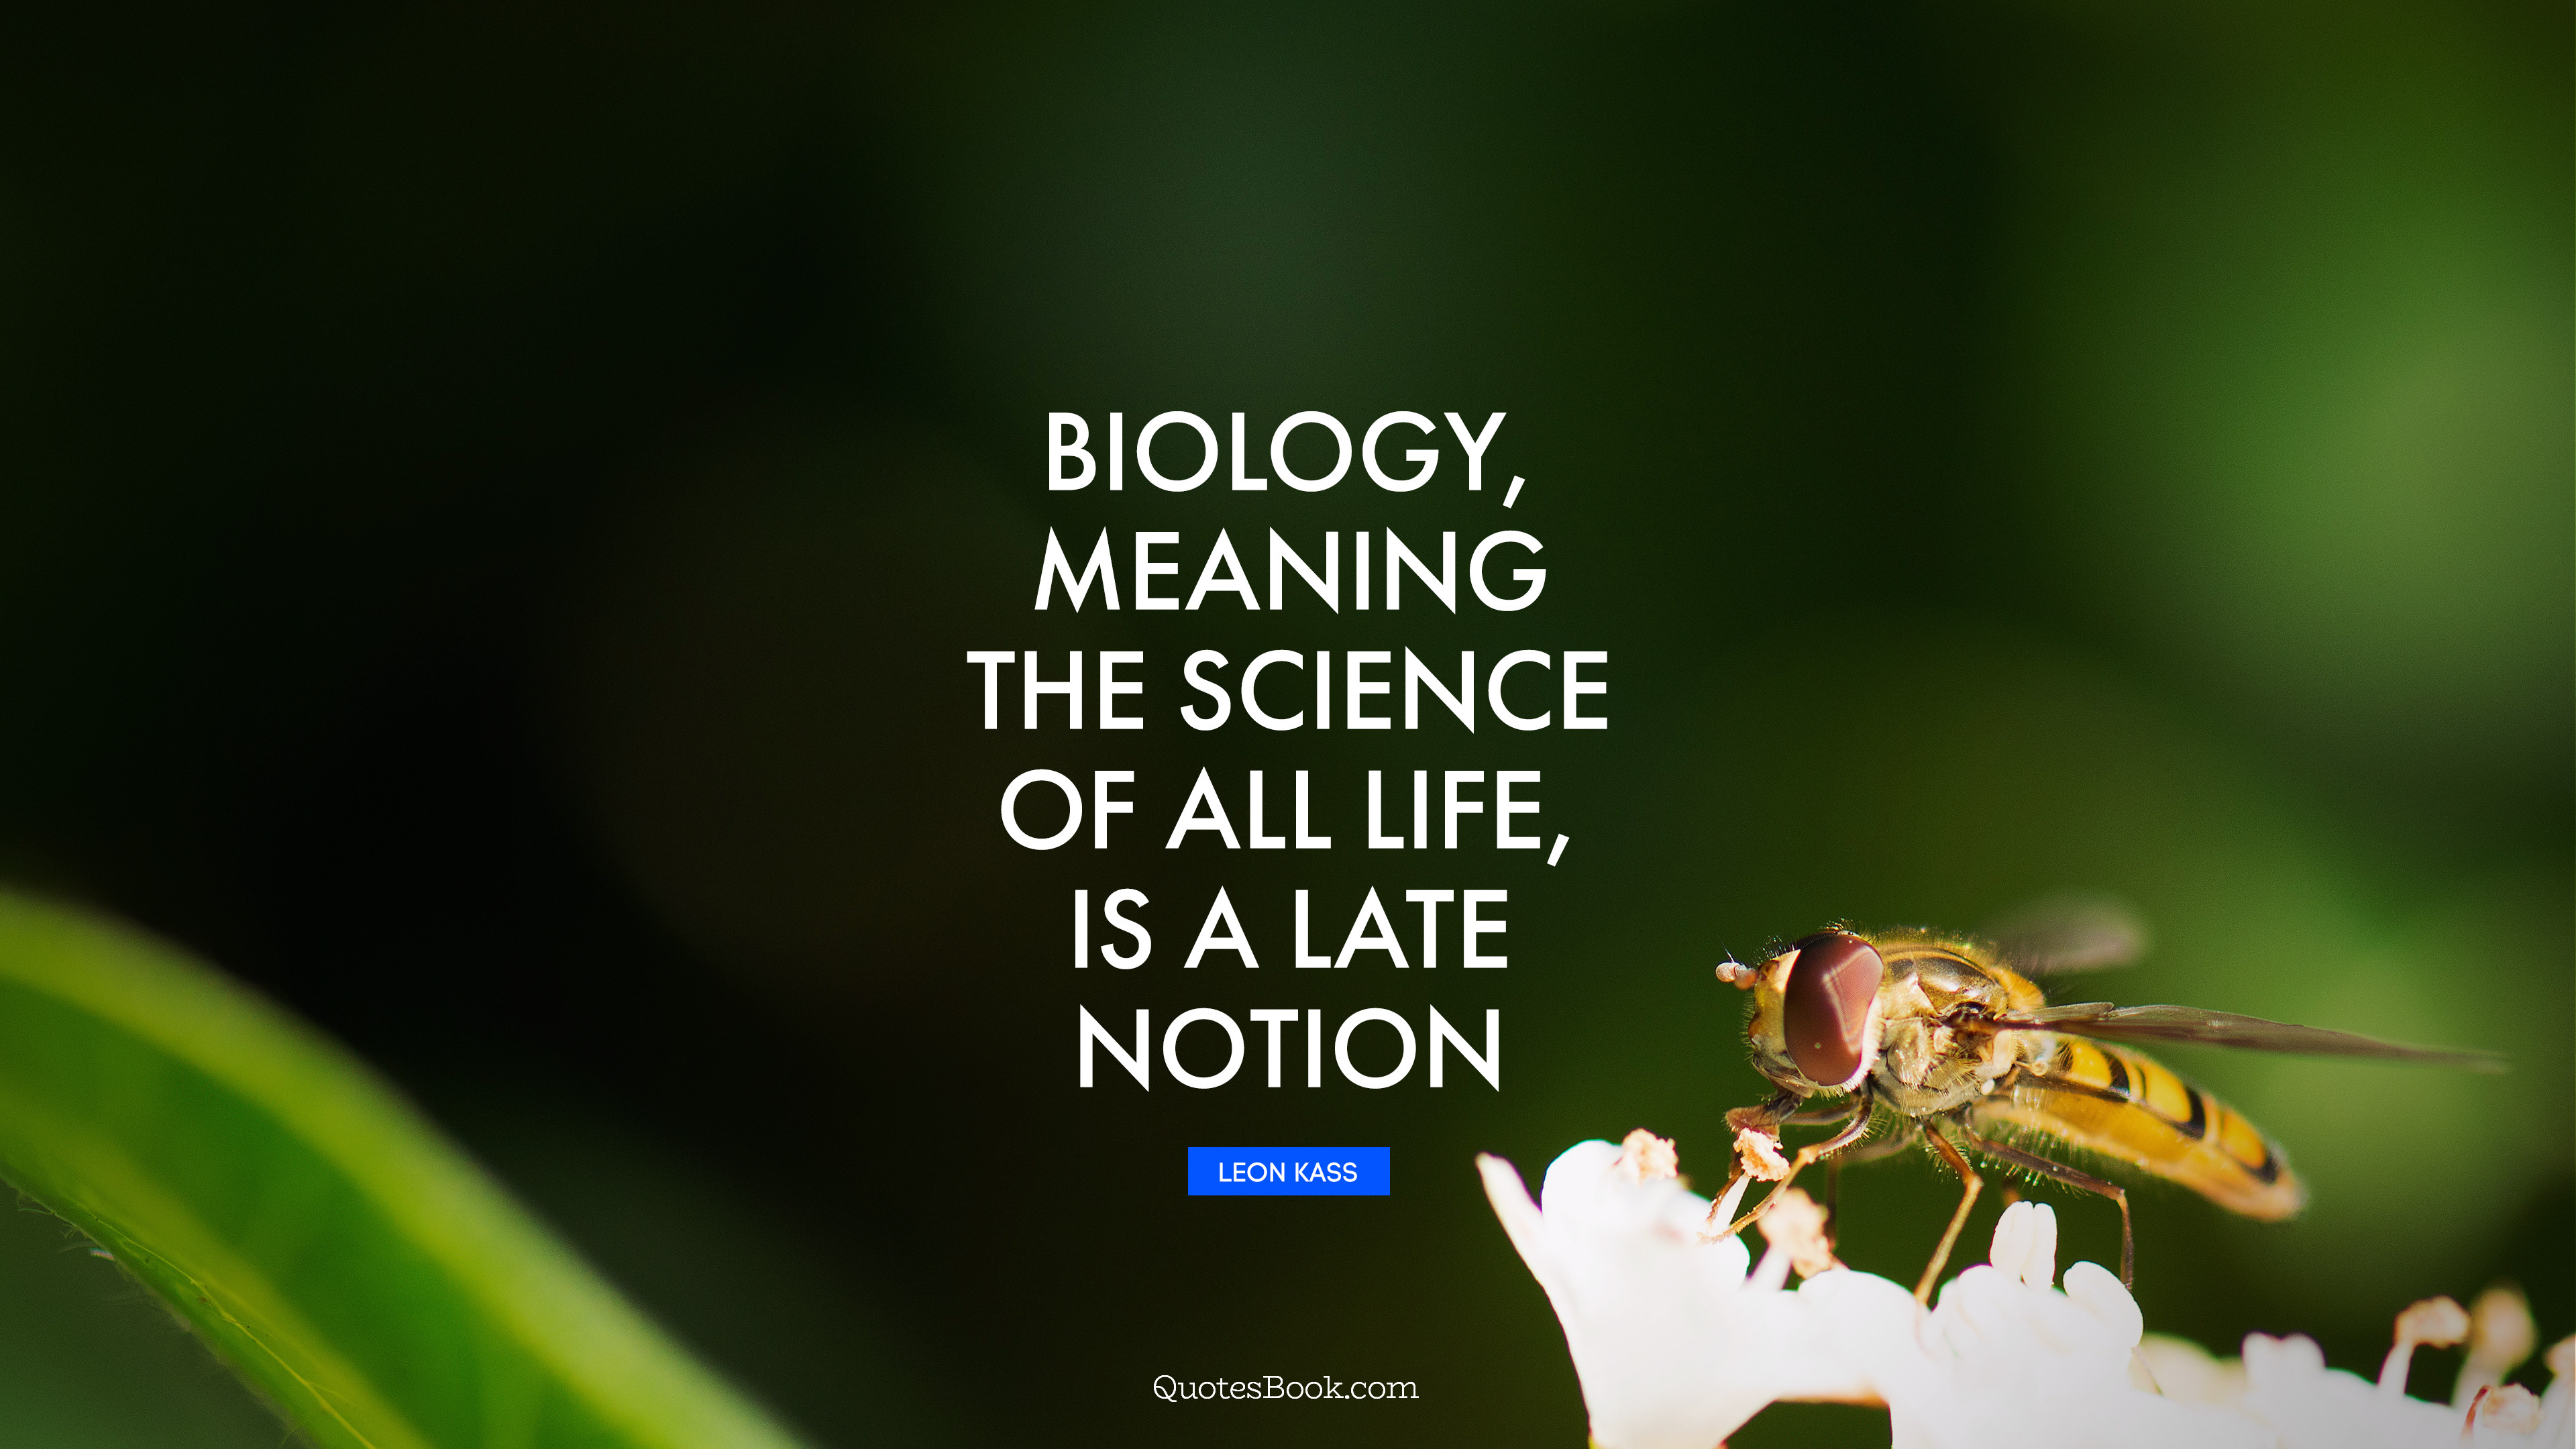 Biology, meaning the science of all life, is a late notion. - Quote by